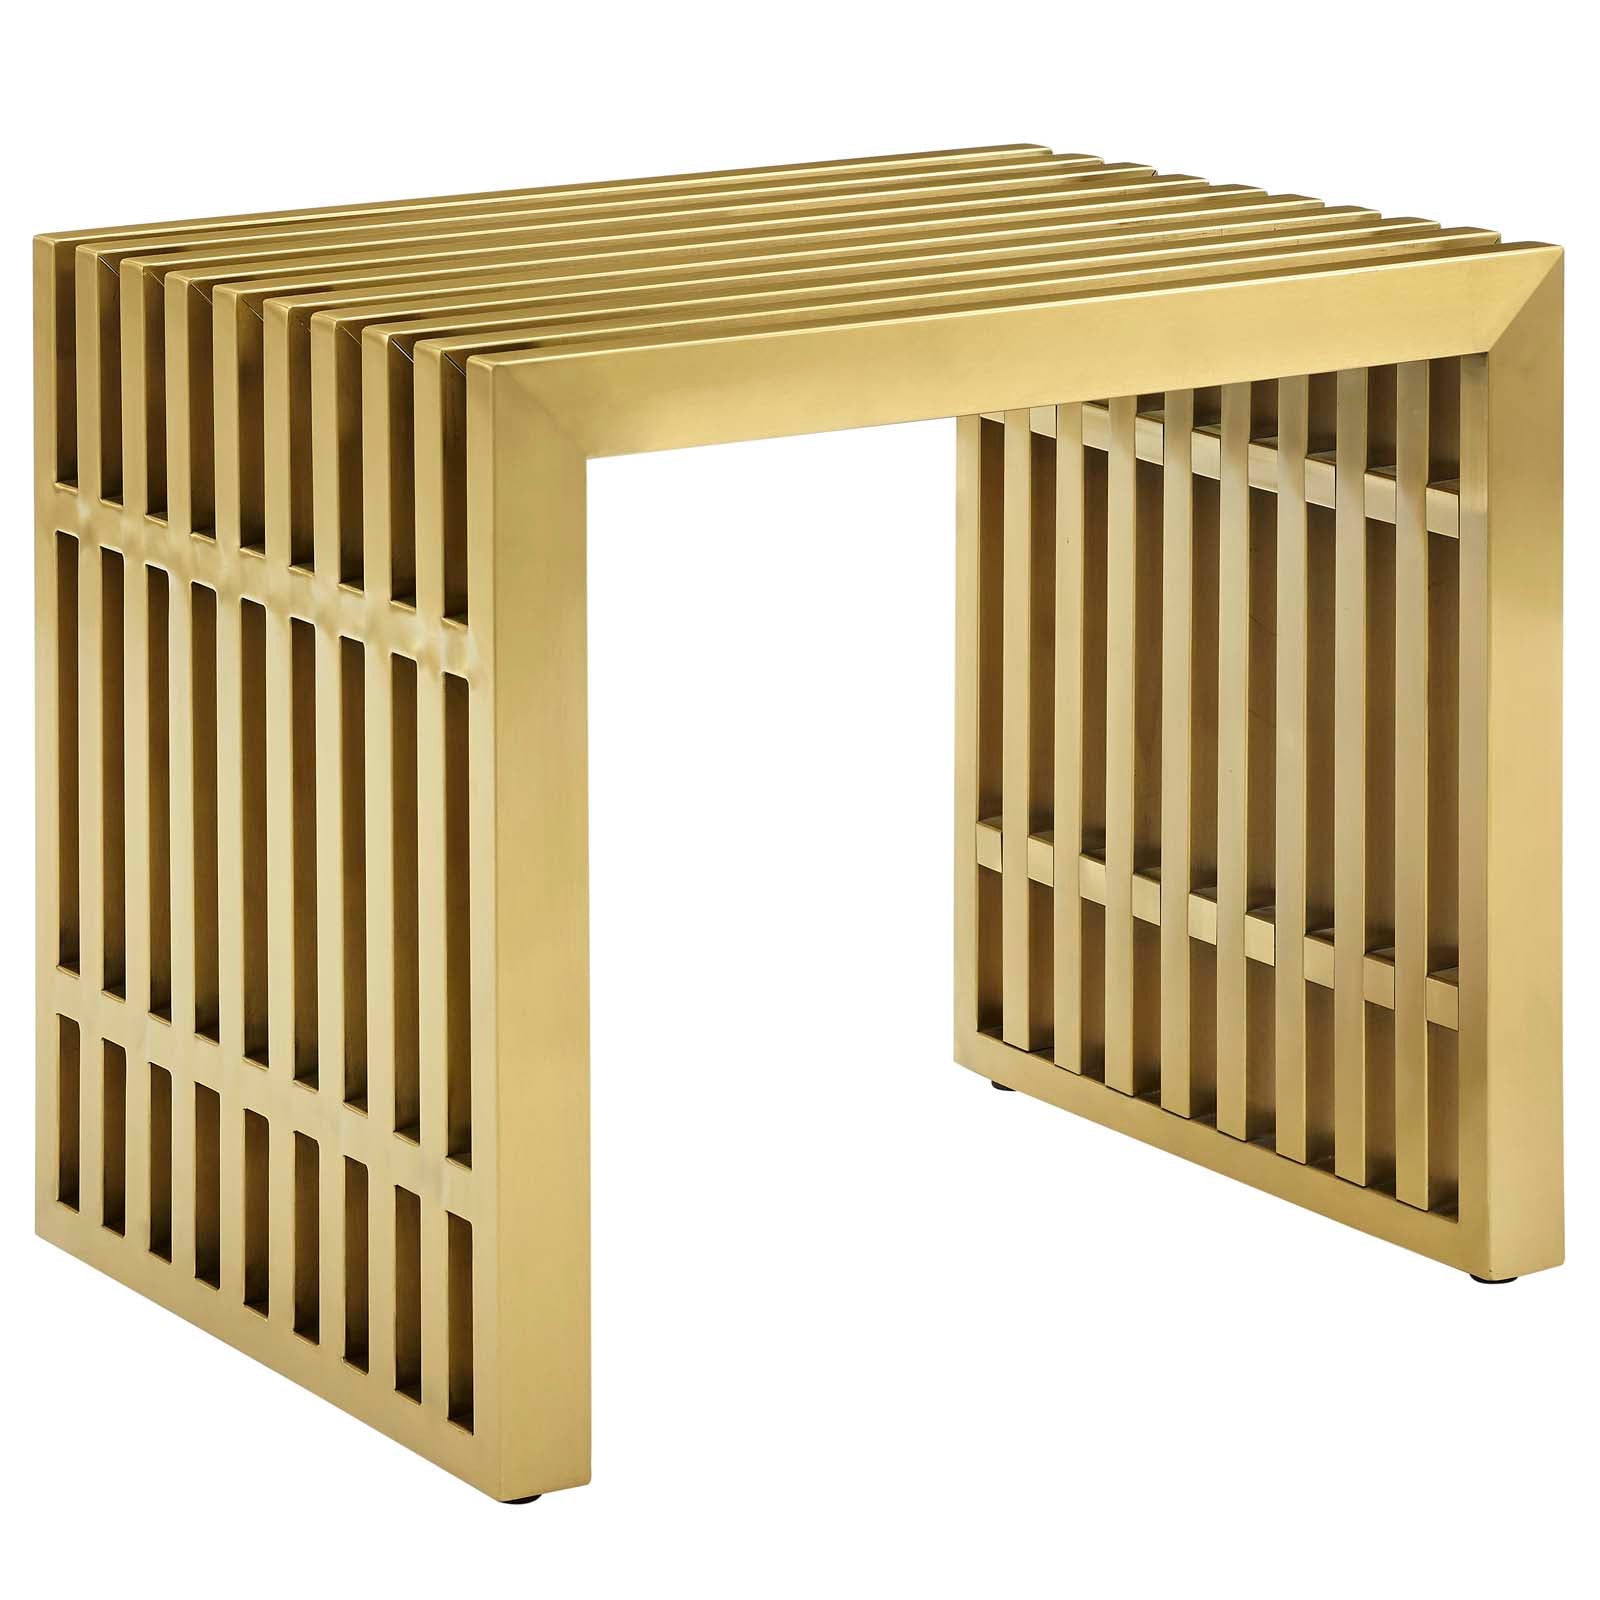 Modway Benches - Gridiron Small Stainless Steel Bench Gold